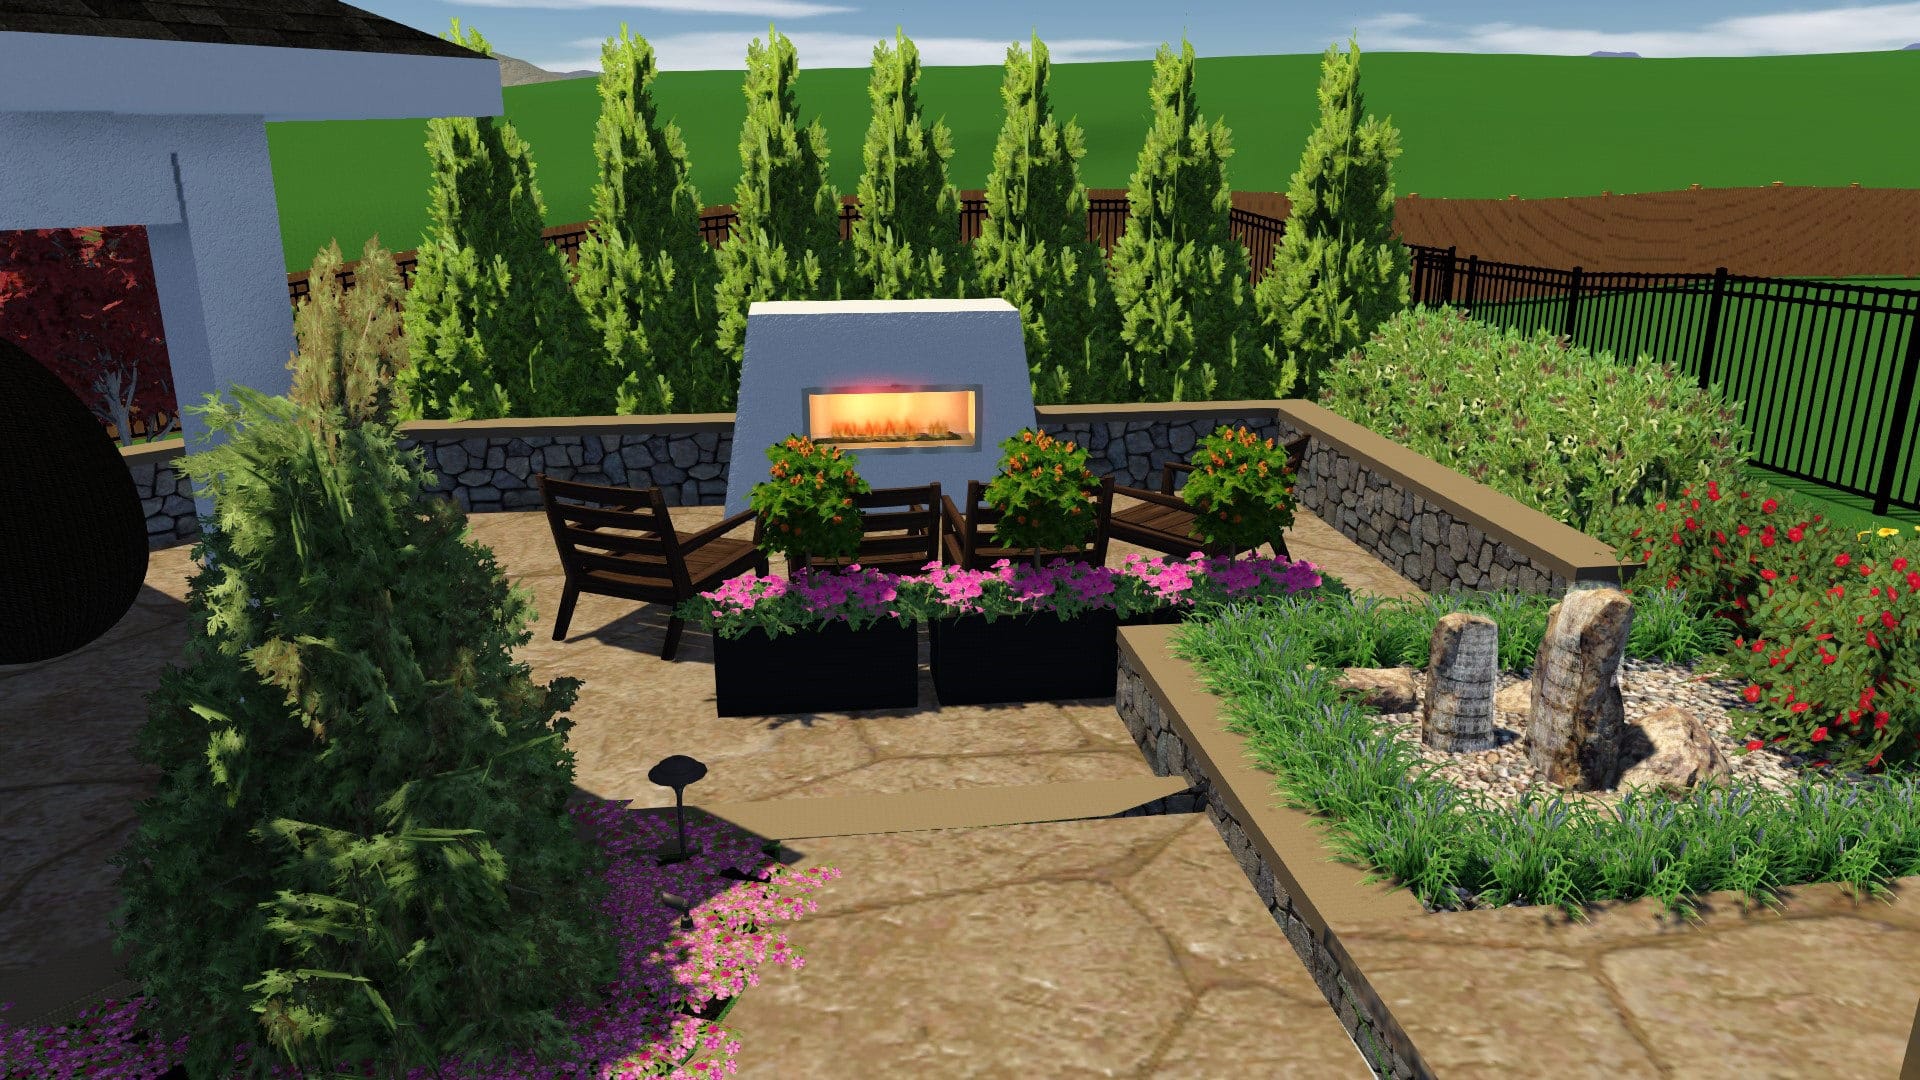 The first destination in this MasterPLAN Outdoor Living space is complete with a custom natural gas fireplace, nearby basalt spire water feature and surrounding seating wall to create the ultimate cozy relaxation and conversation zone.